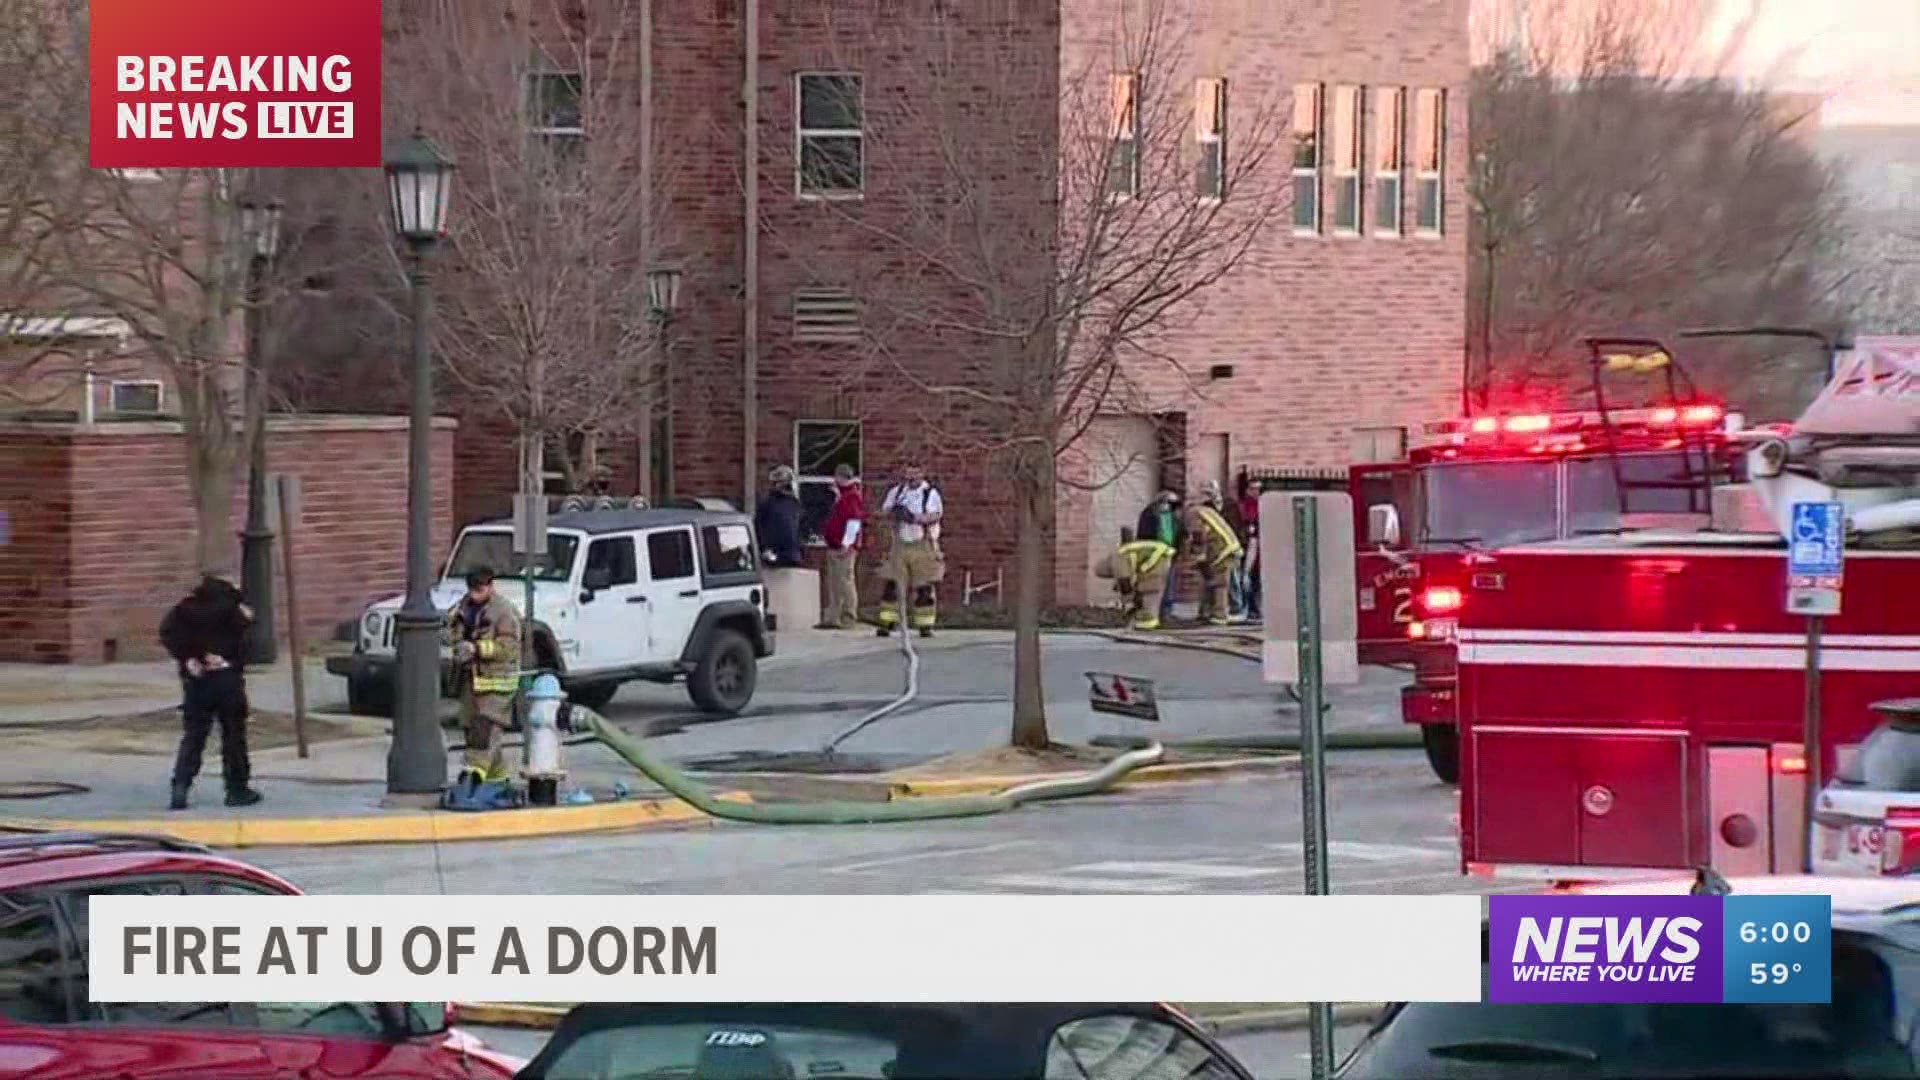 Reid Hall on the University of Arkansas campus evacuated due to possible fire